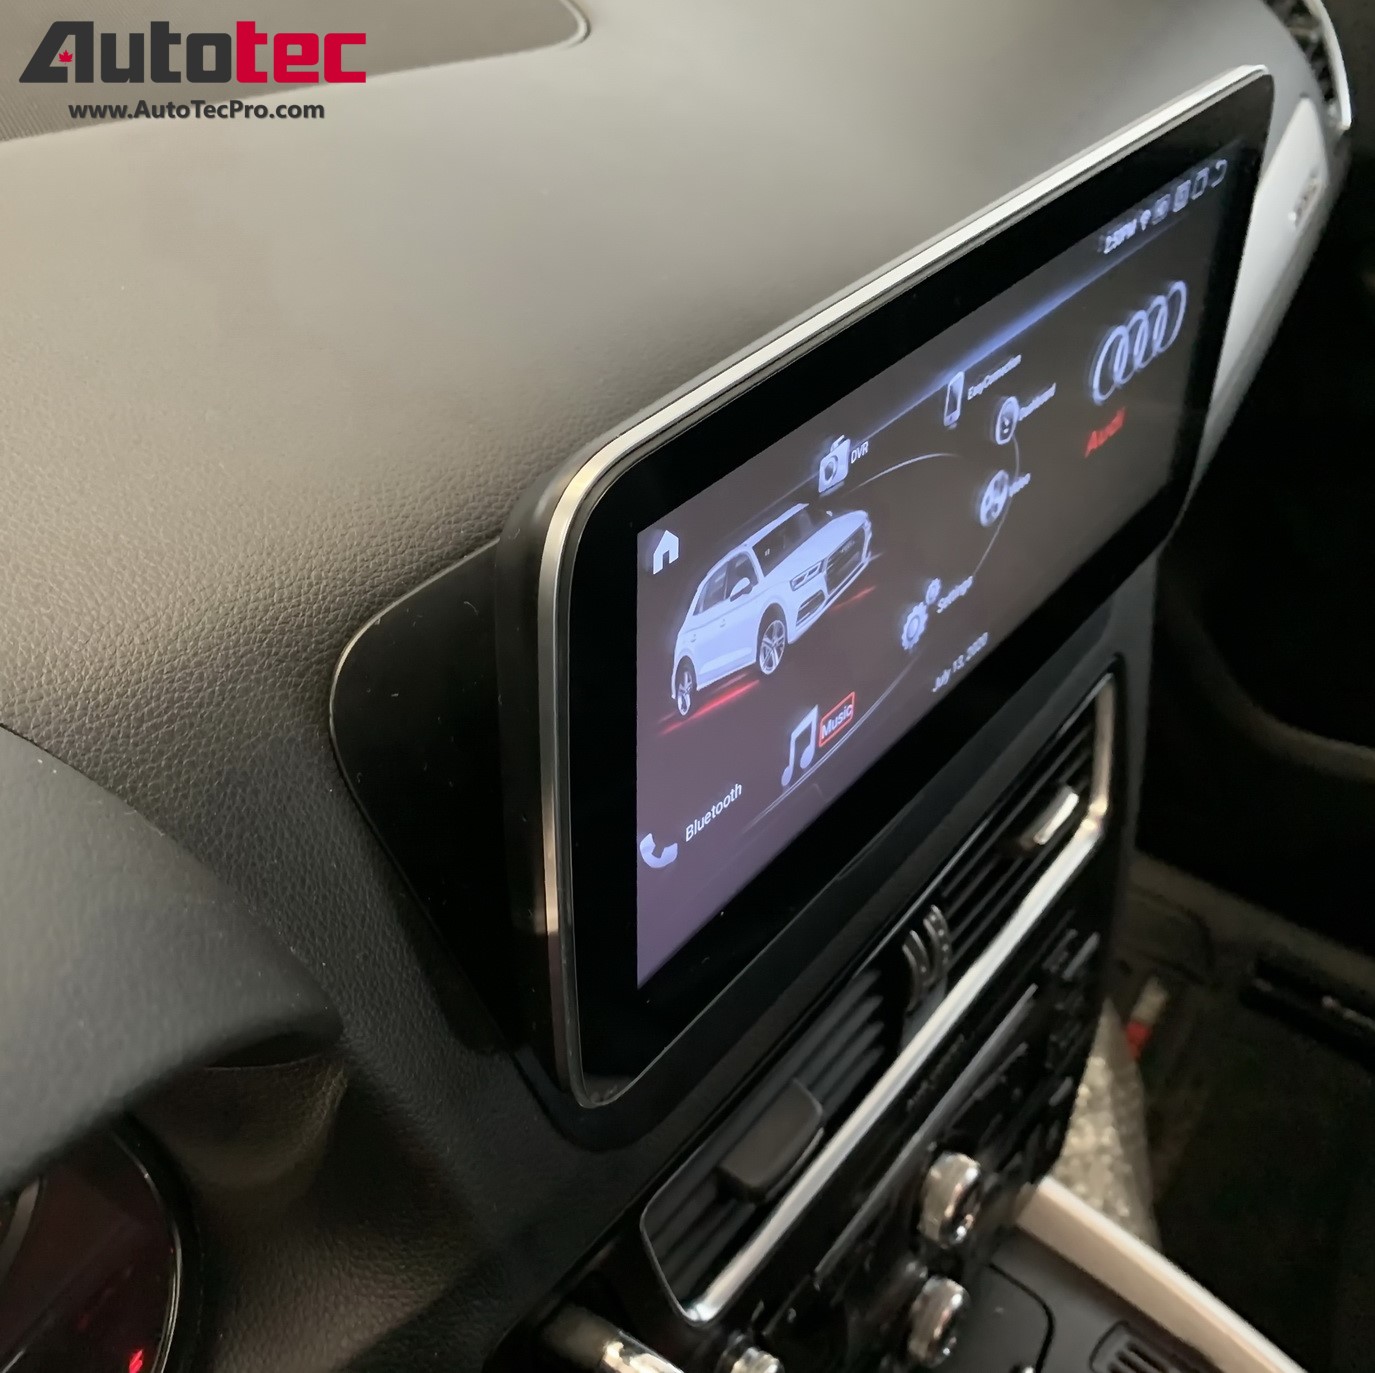 GPS Audi Q5 SQ5 Android 2008-2017 Alkadyn 8.8 pouces